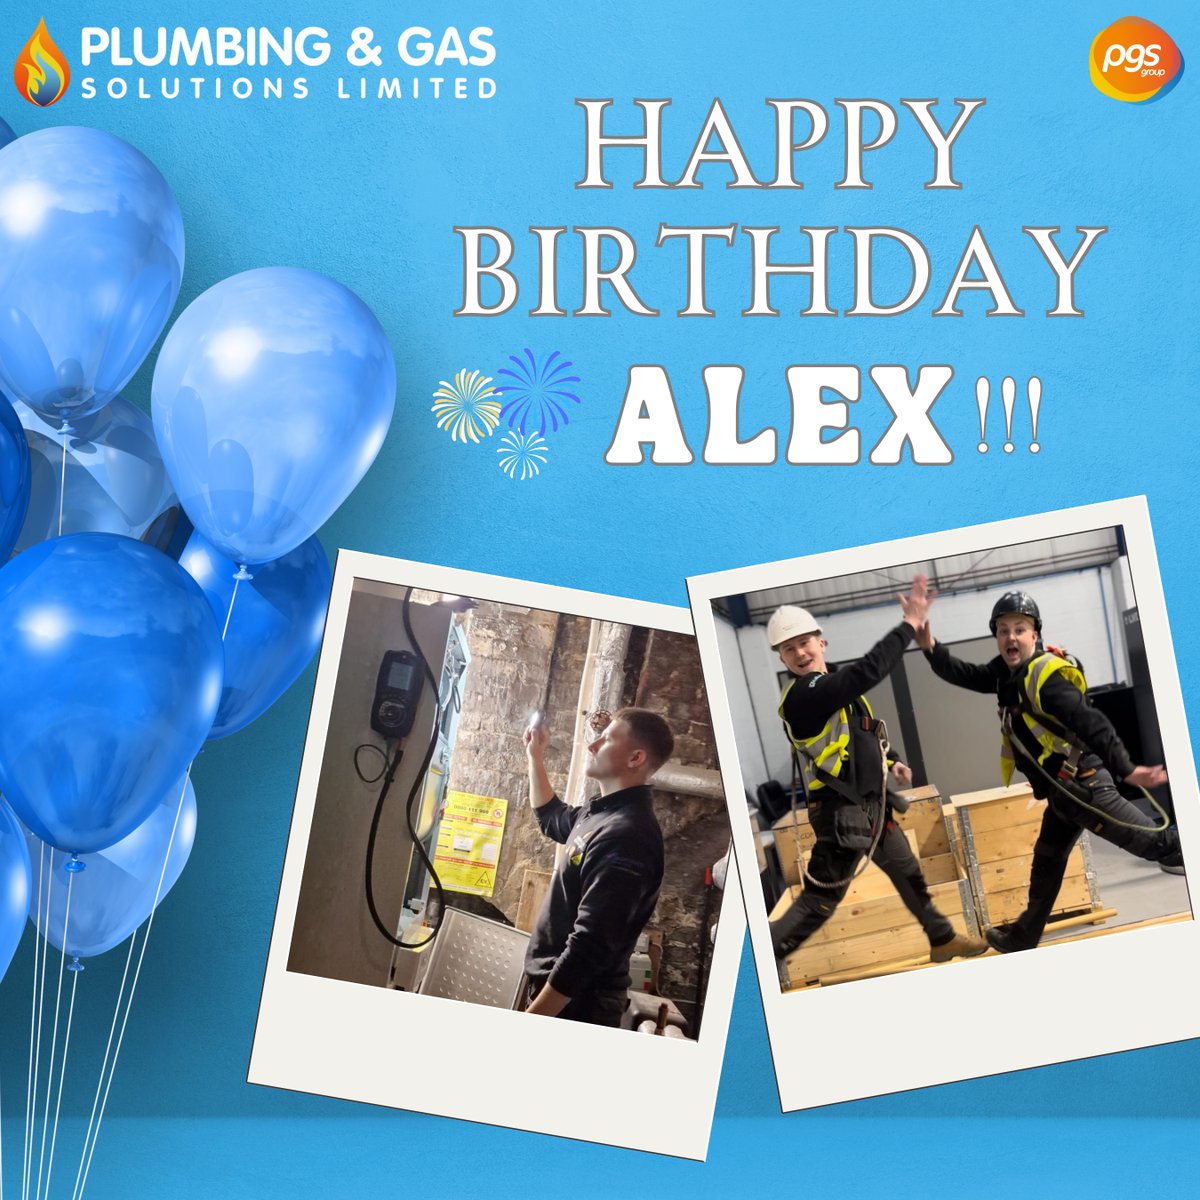 Please join us in wishing our Plumbing and Heating Apprentice Alex a very Happy Birthday, today! 🎂🎉 Alex has been with us for over a year and a half now and has already progressed massively, becoming an integral part of our team. #HappyBirthday